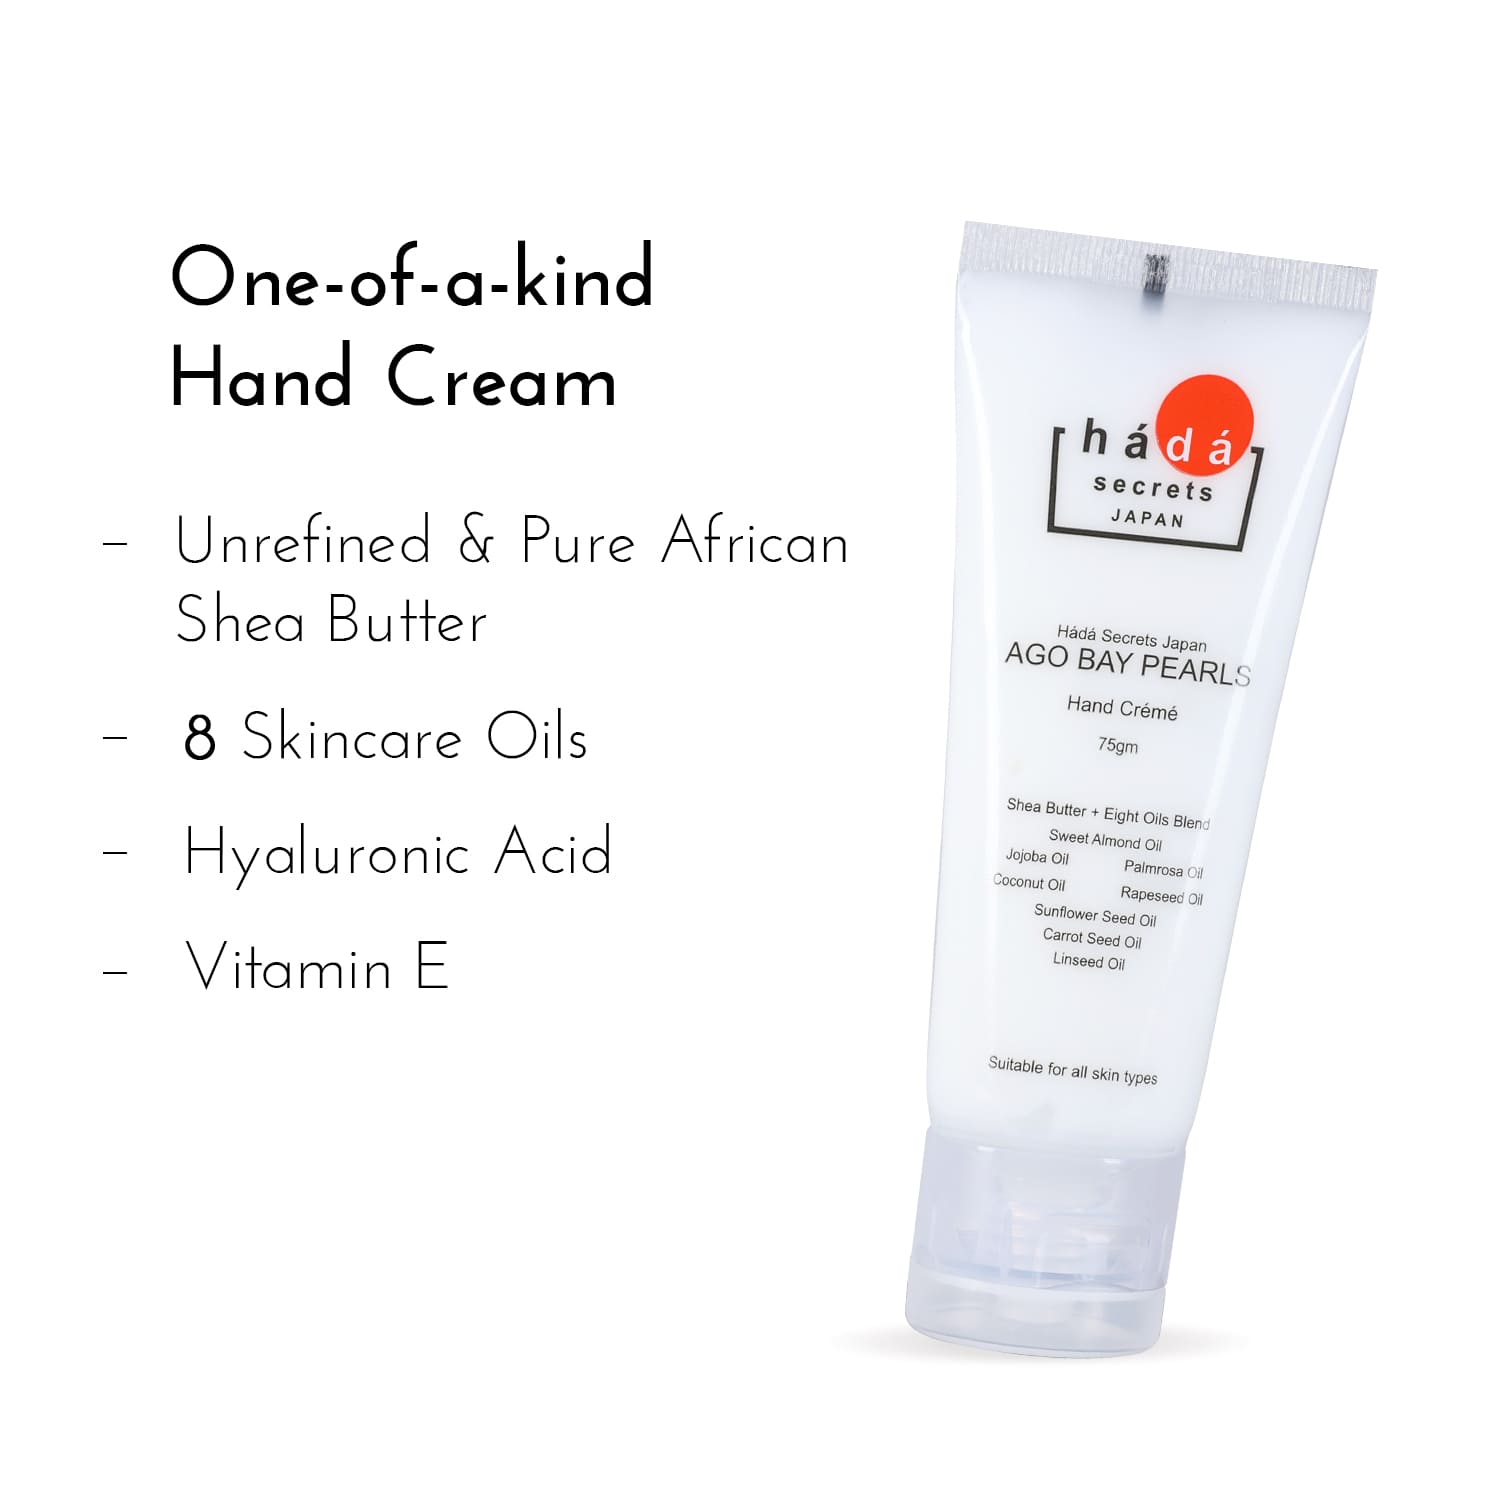 Ago Bay Pearls Hand Cream with Shea Butter, Hyaluronic Acid & Eight Oils